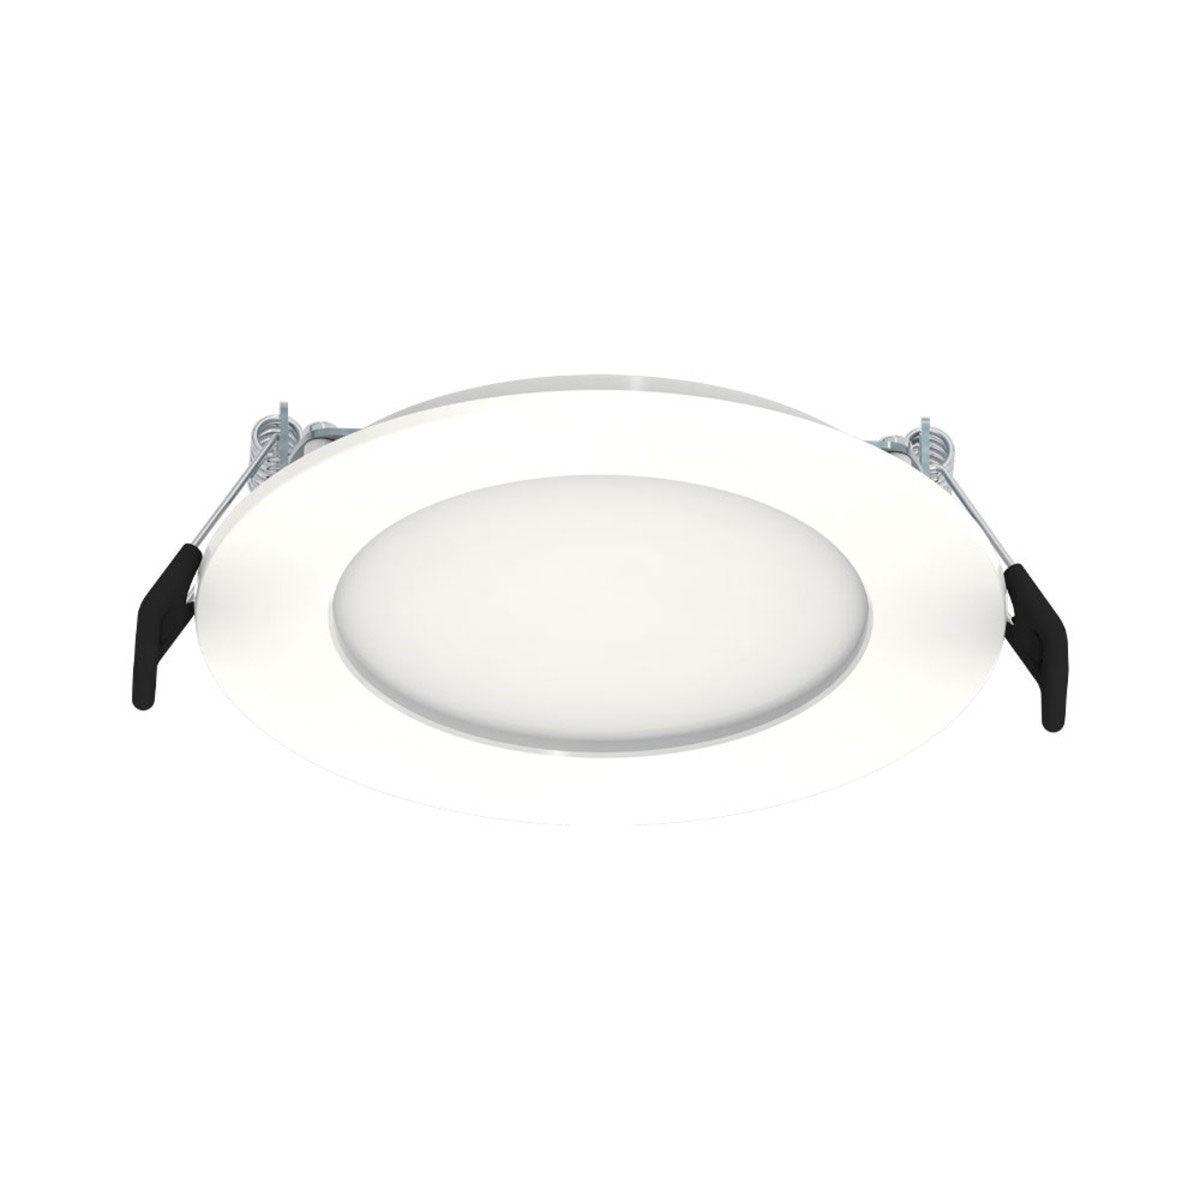 4 In. Edge-Lit Wafer Canless LED Recessed Light, 9 Watt, 700 Lumens, Selectable CCT, 2700K to 5000K, Smooth Trim